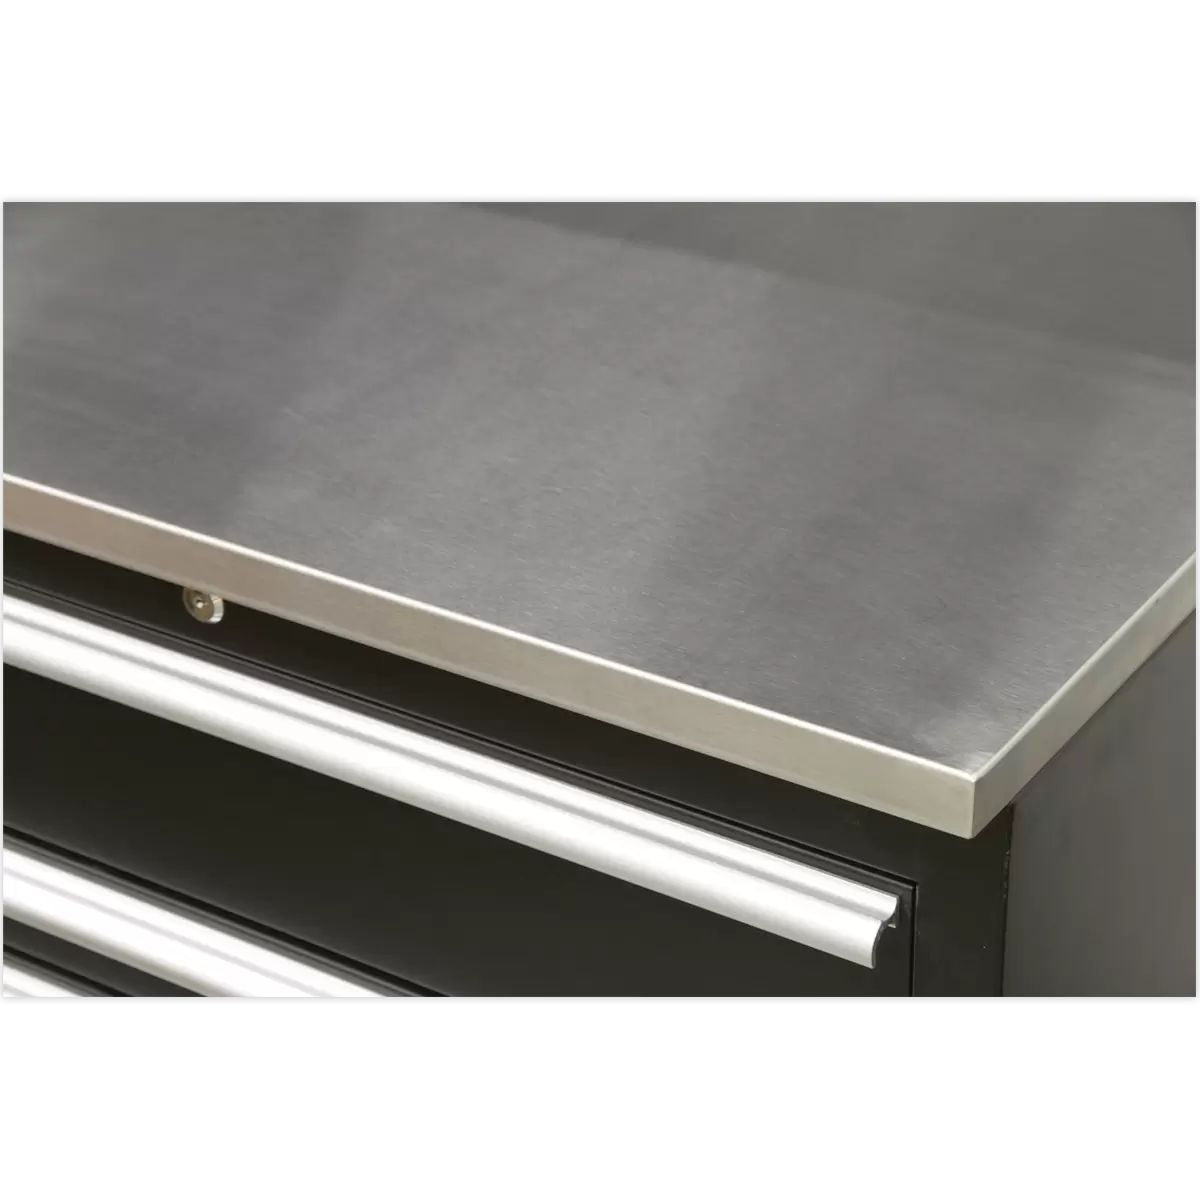 Sealey APMSCOMBO6SS Premier 1.7m Corner Storage System Stainless Worktop